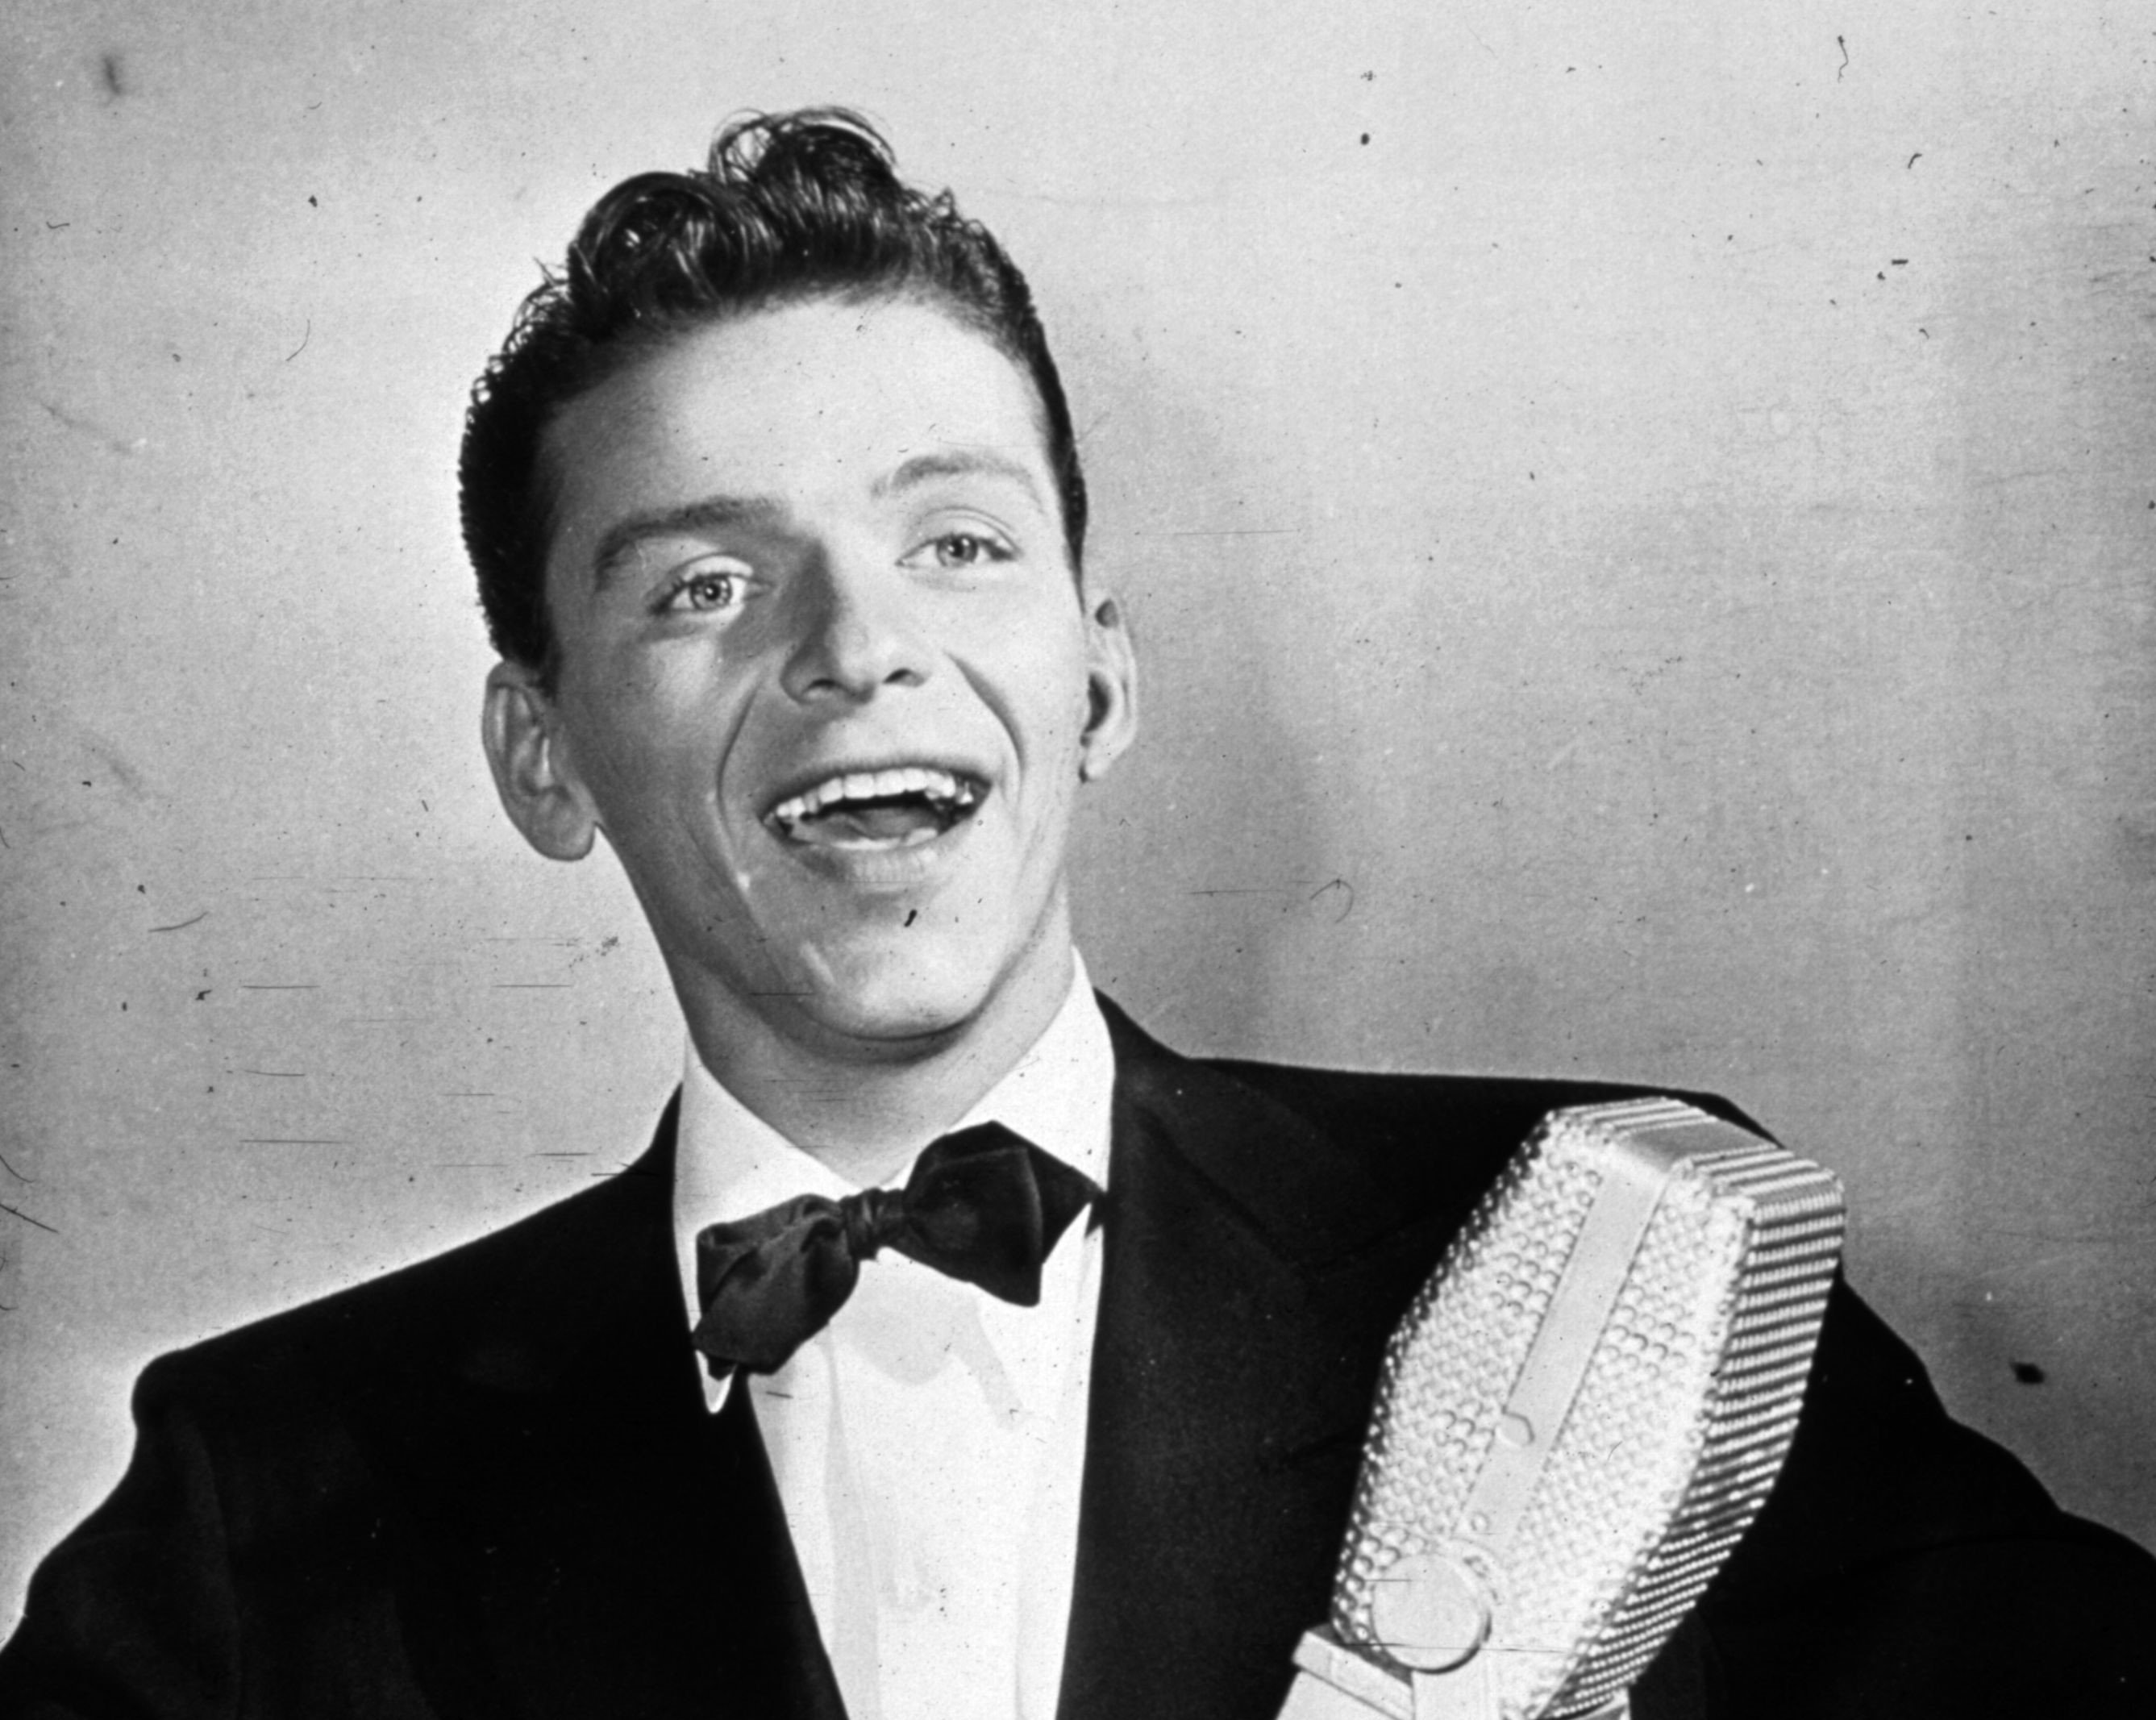 Frank Sinatra wears a tuxedo and stands in front of a microphone.